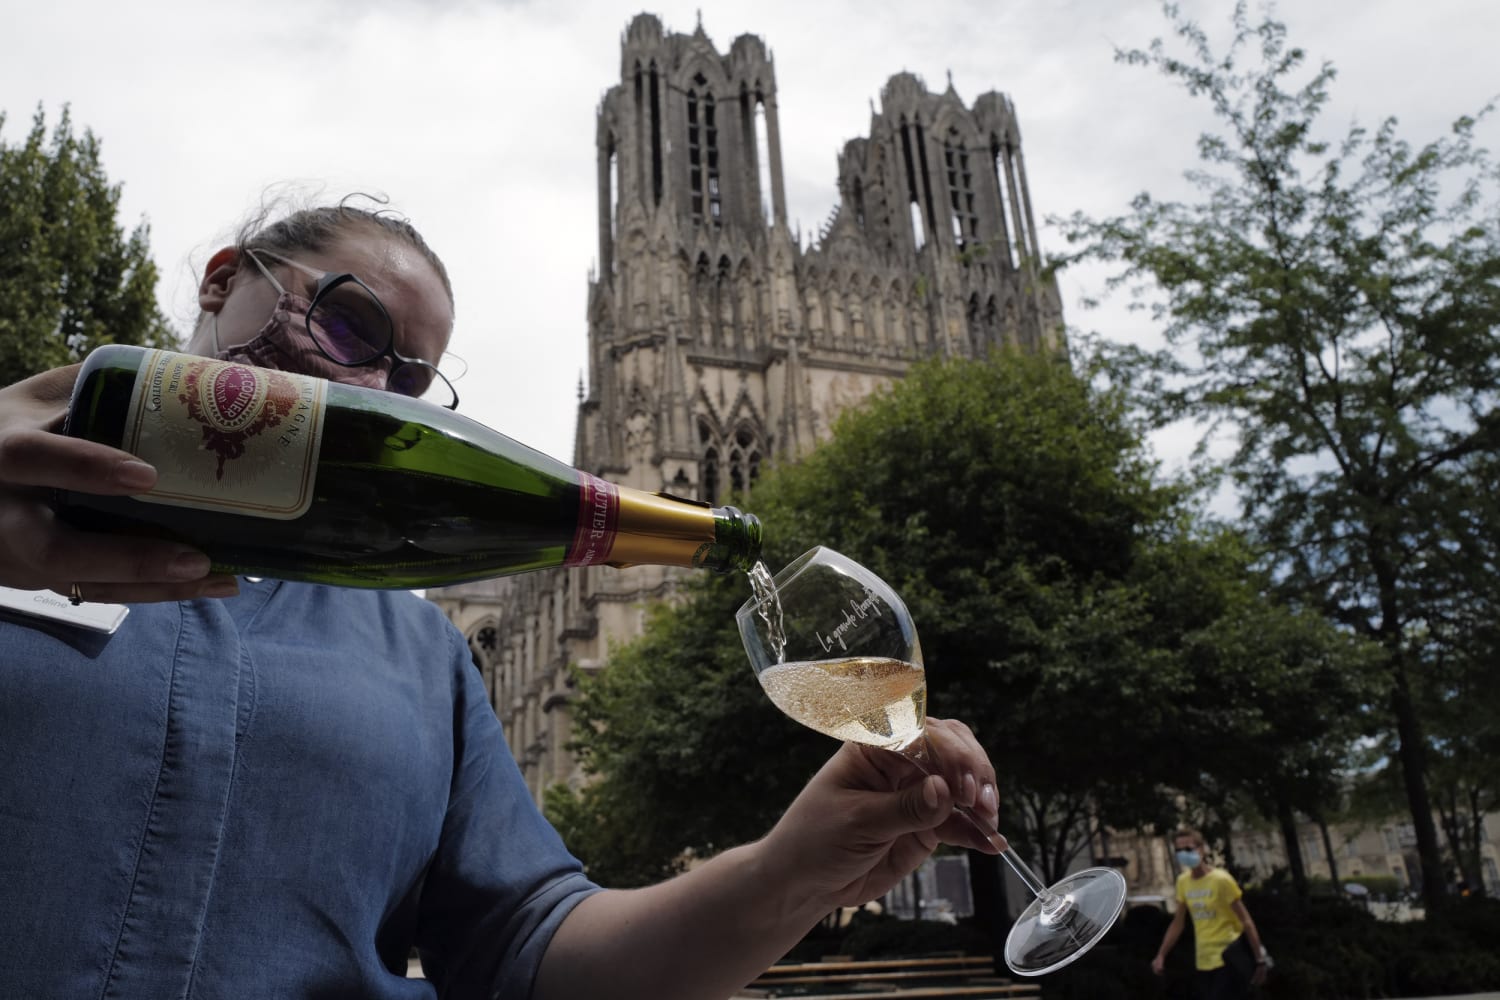 Champagne Demand Softens After Post-Covid Boom Years, LVMH Says - Bloomberg